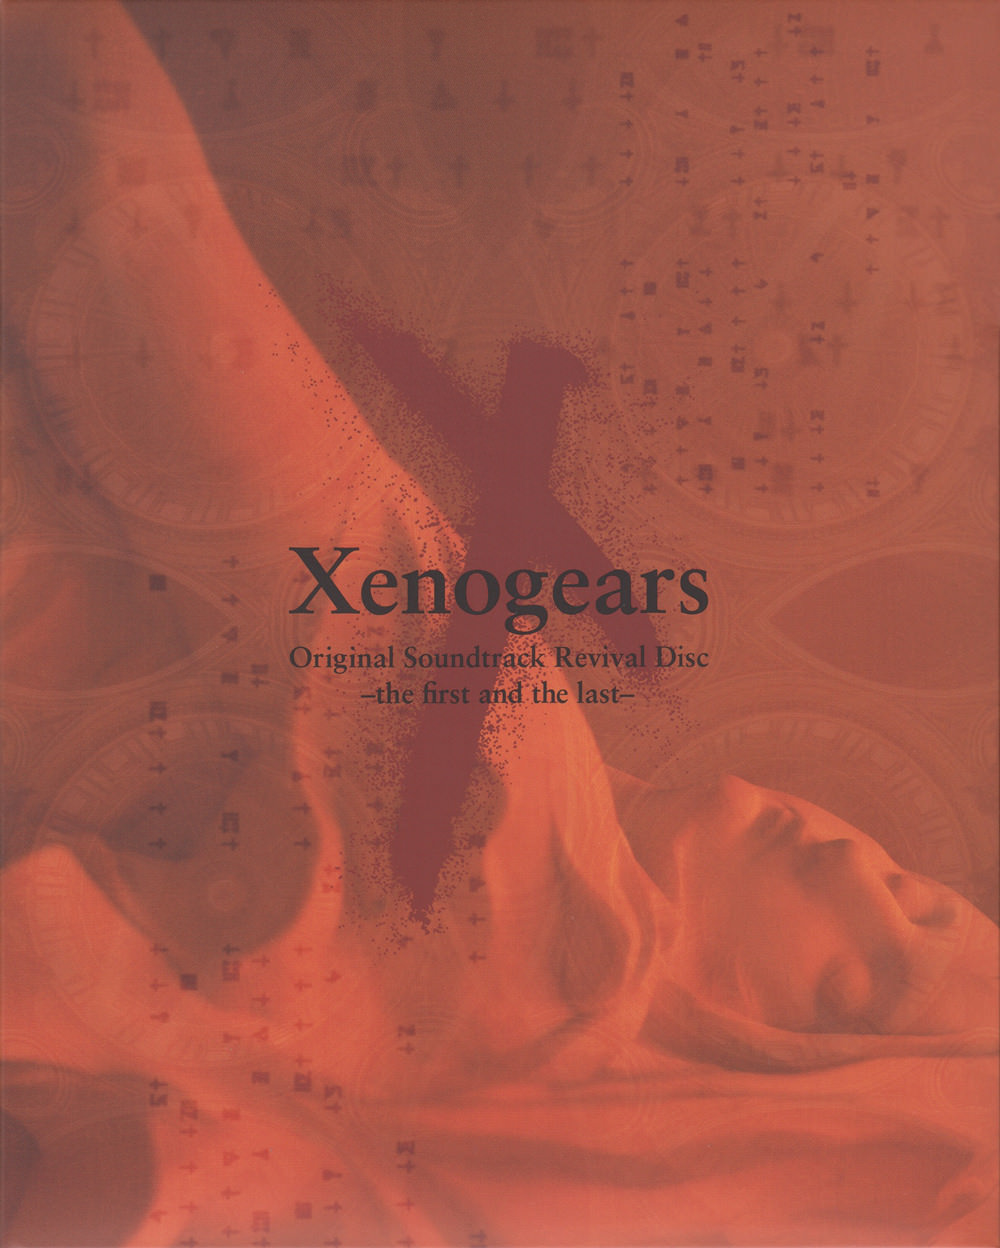 Xenogears Original Soundtrack Revival Disc - the first and the last -